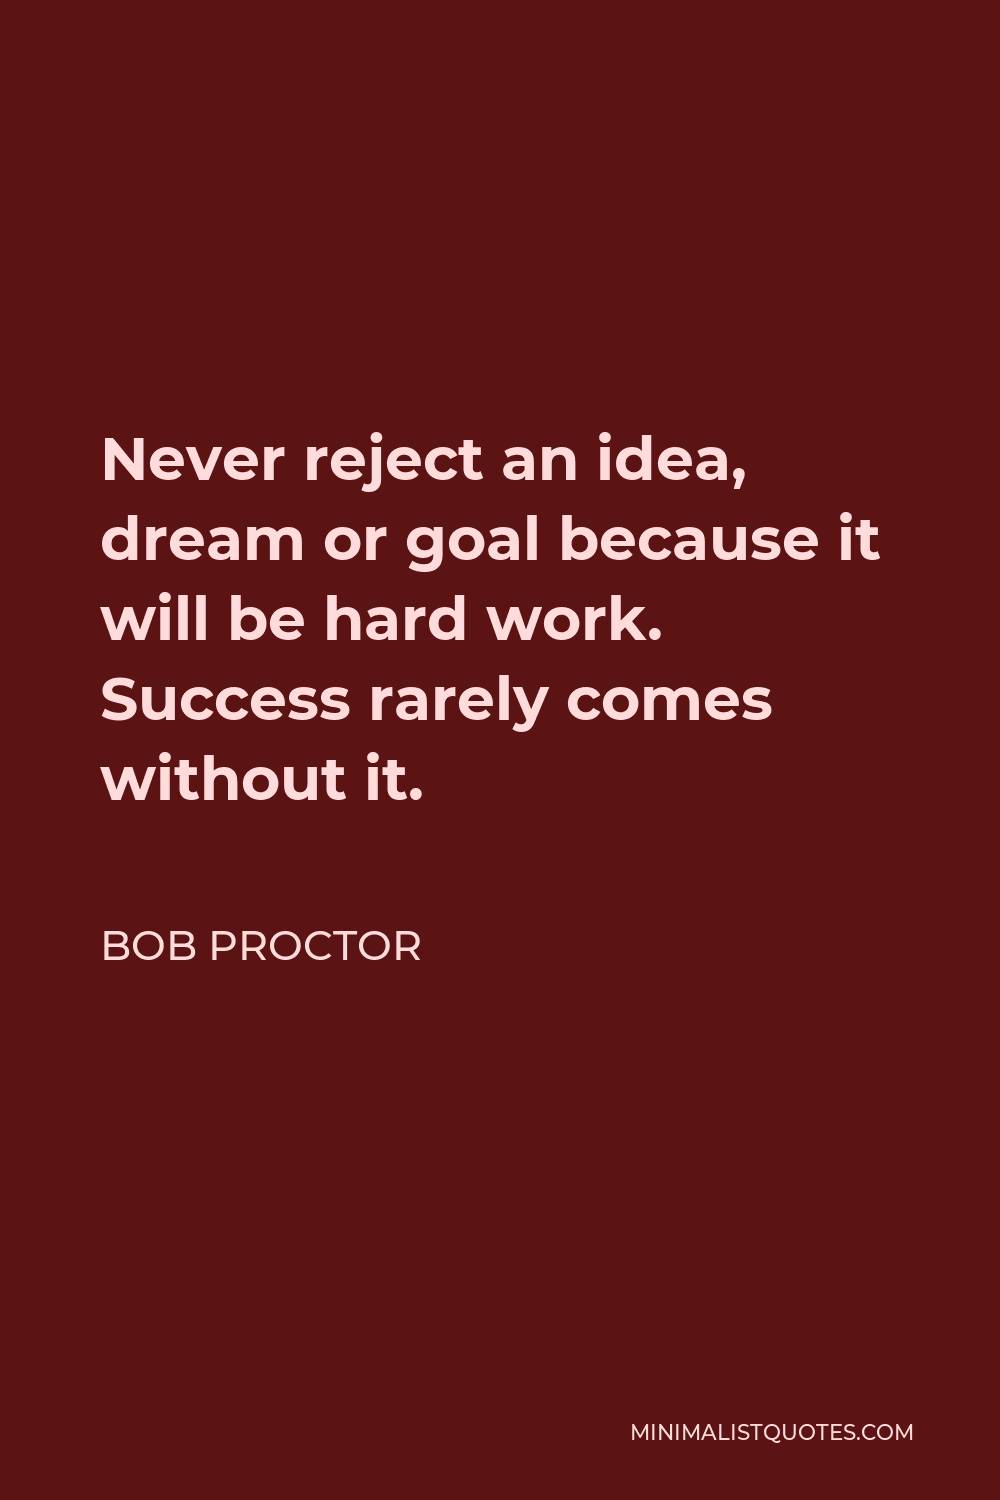 Bob Proctor Quote - Never reject an idea, dream or goal because it will be hard work. Success rarely comes without it.